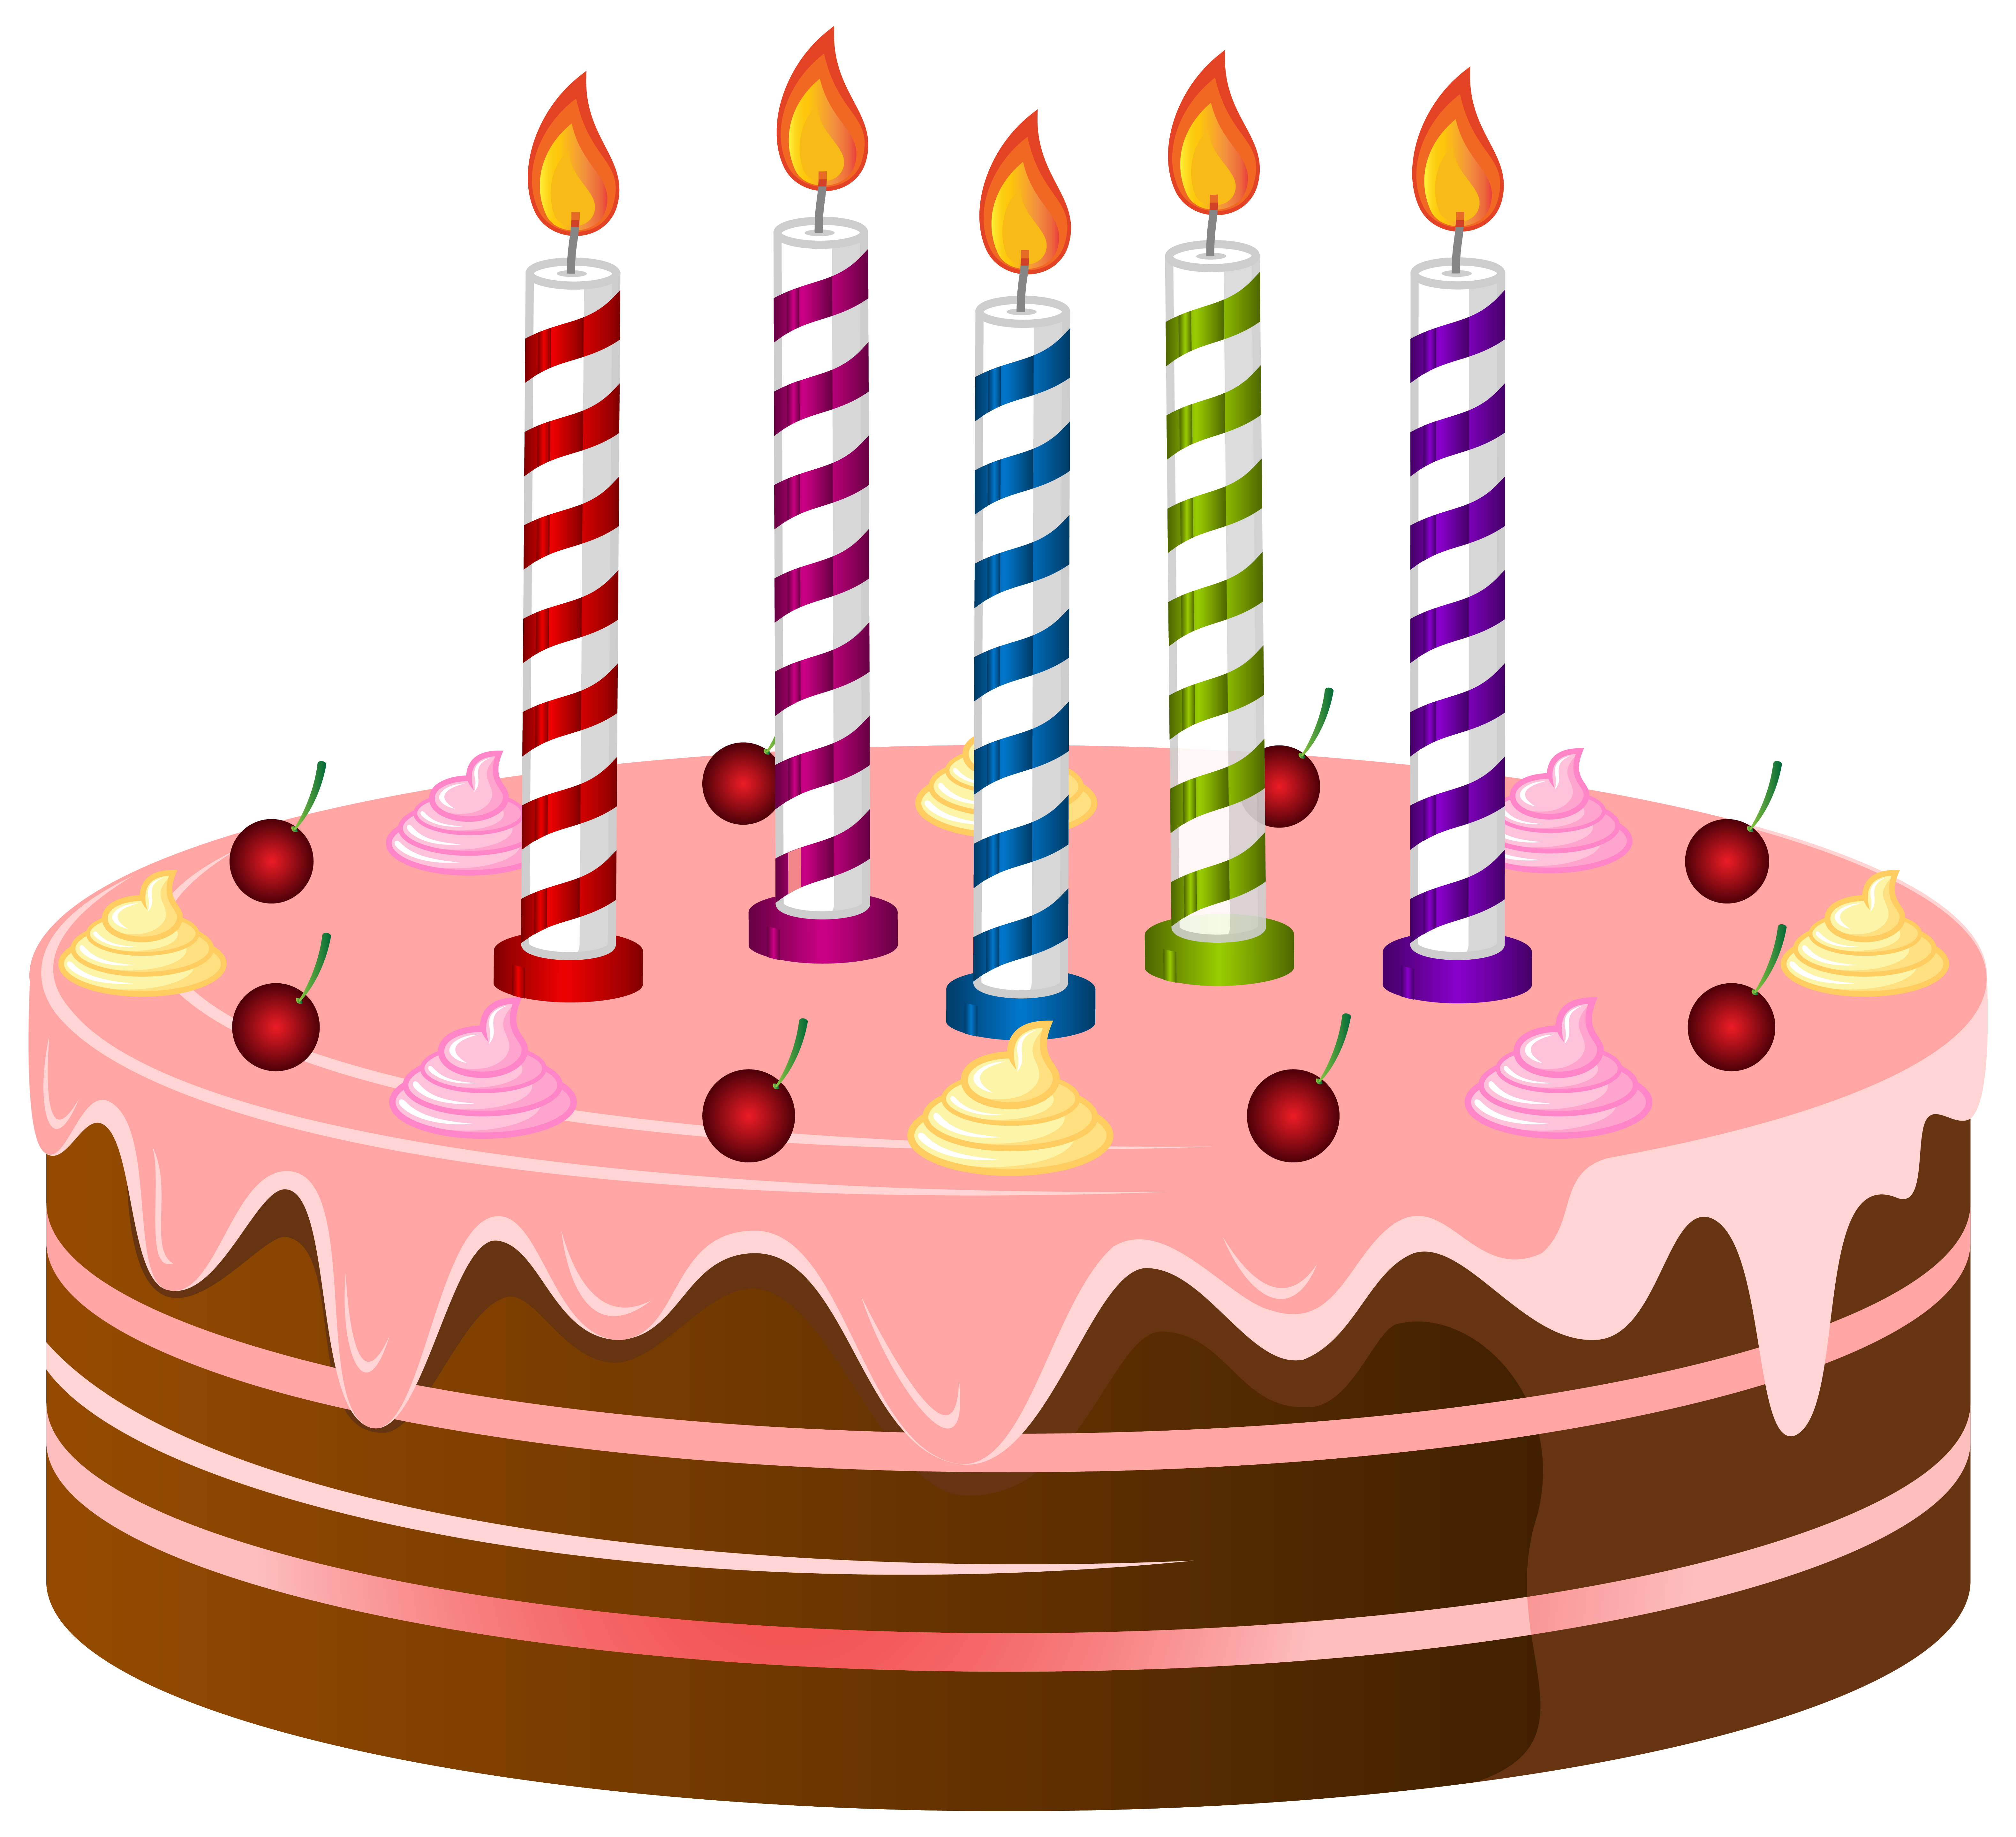 Birthday Cake Png Clip Art Image Gallery Yopriceville High Quality Images And Transparent Png Free Clipart